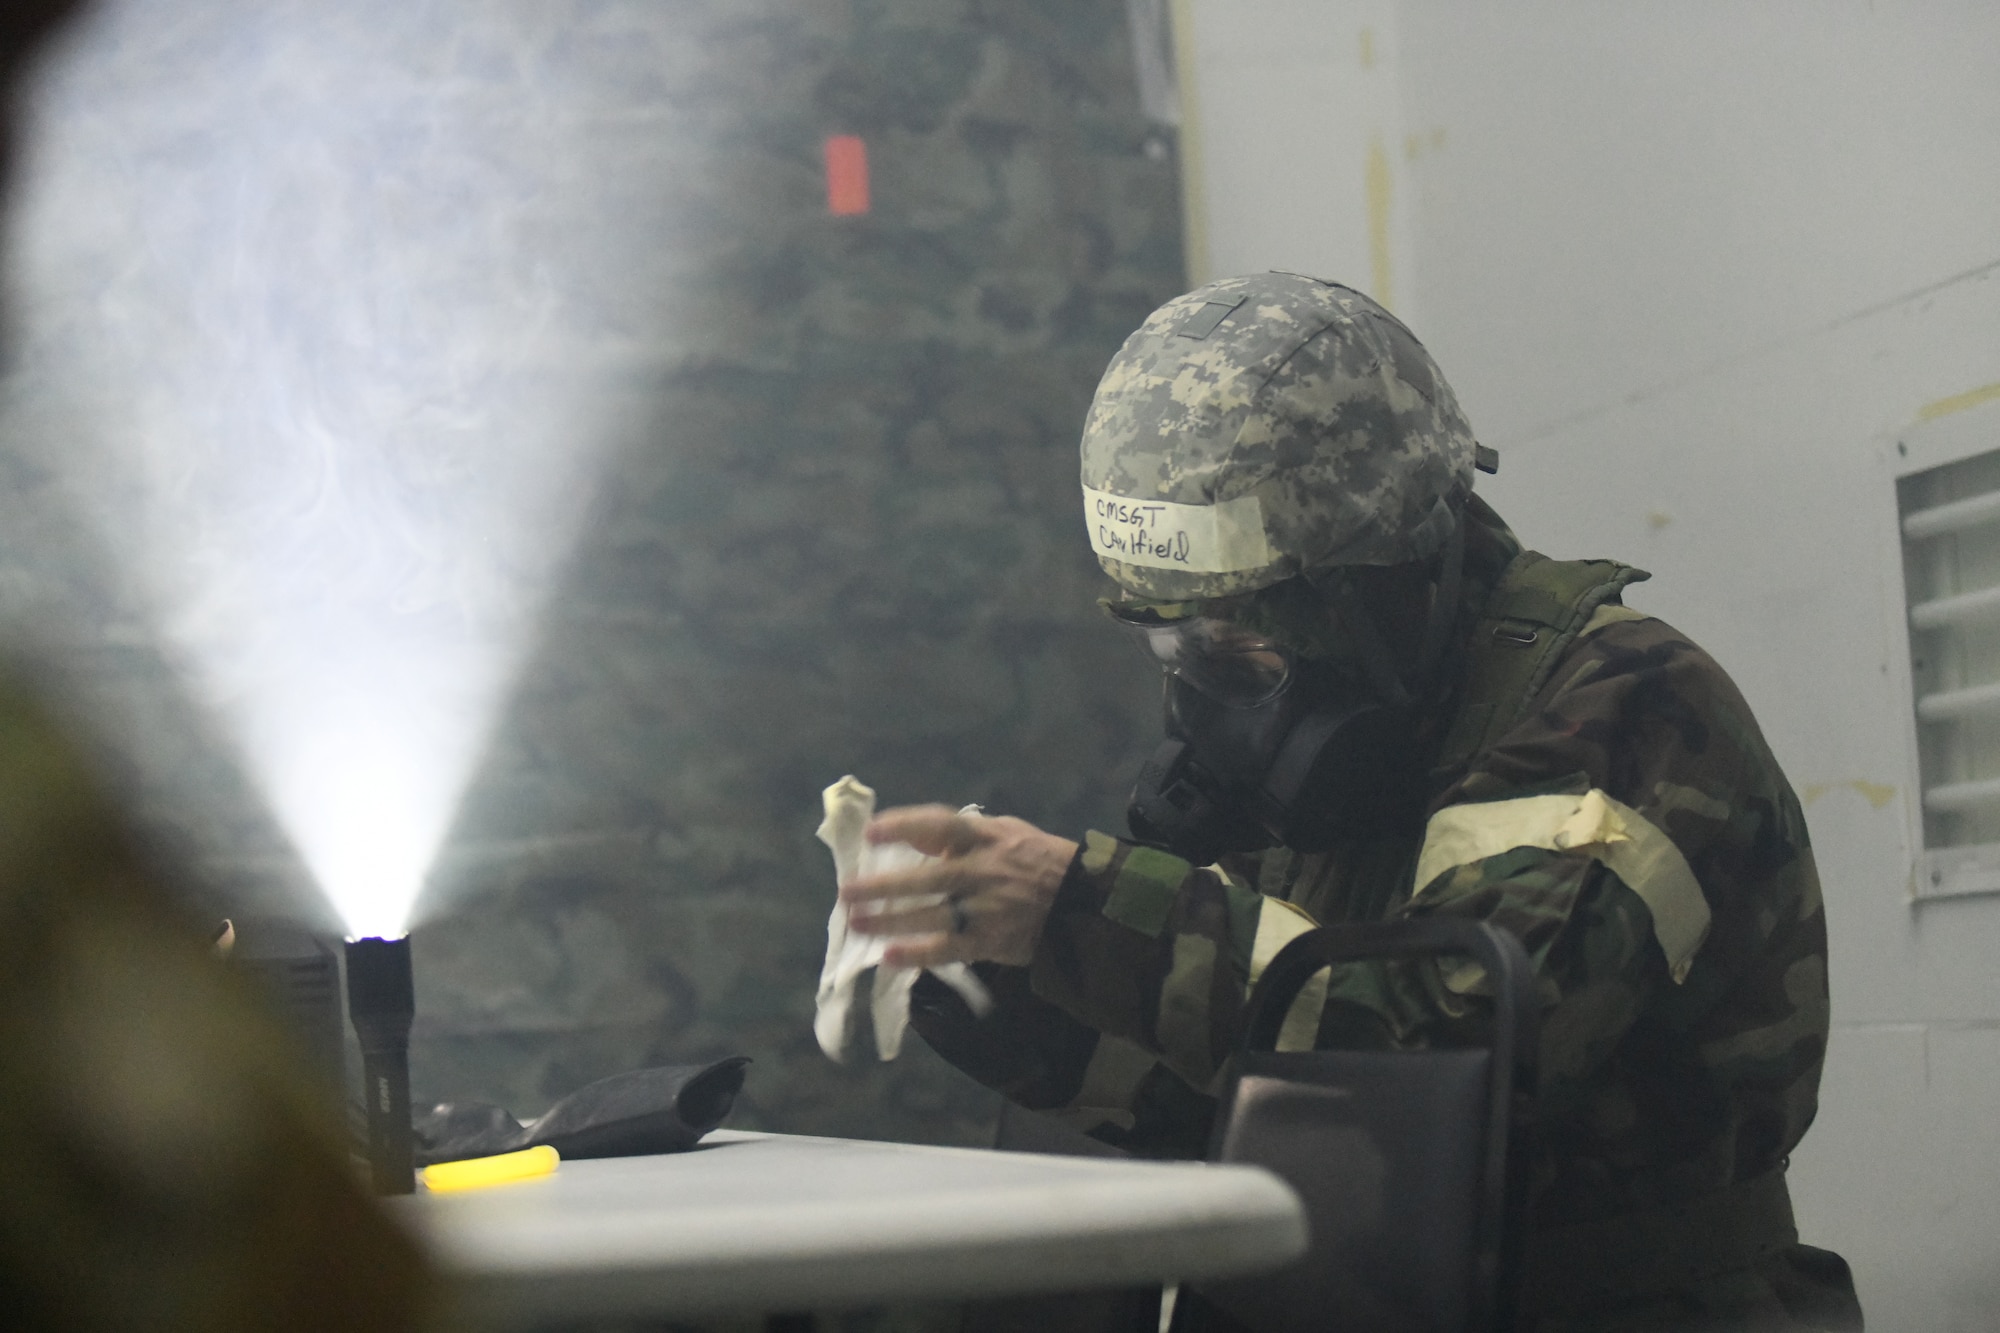 Chief Master Sgt. Joseph Caulfield, 105th AW command chief, prepares for a simulated gas exposure during a joint training, readiness exercise